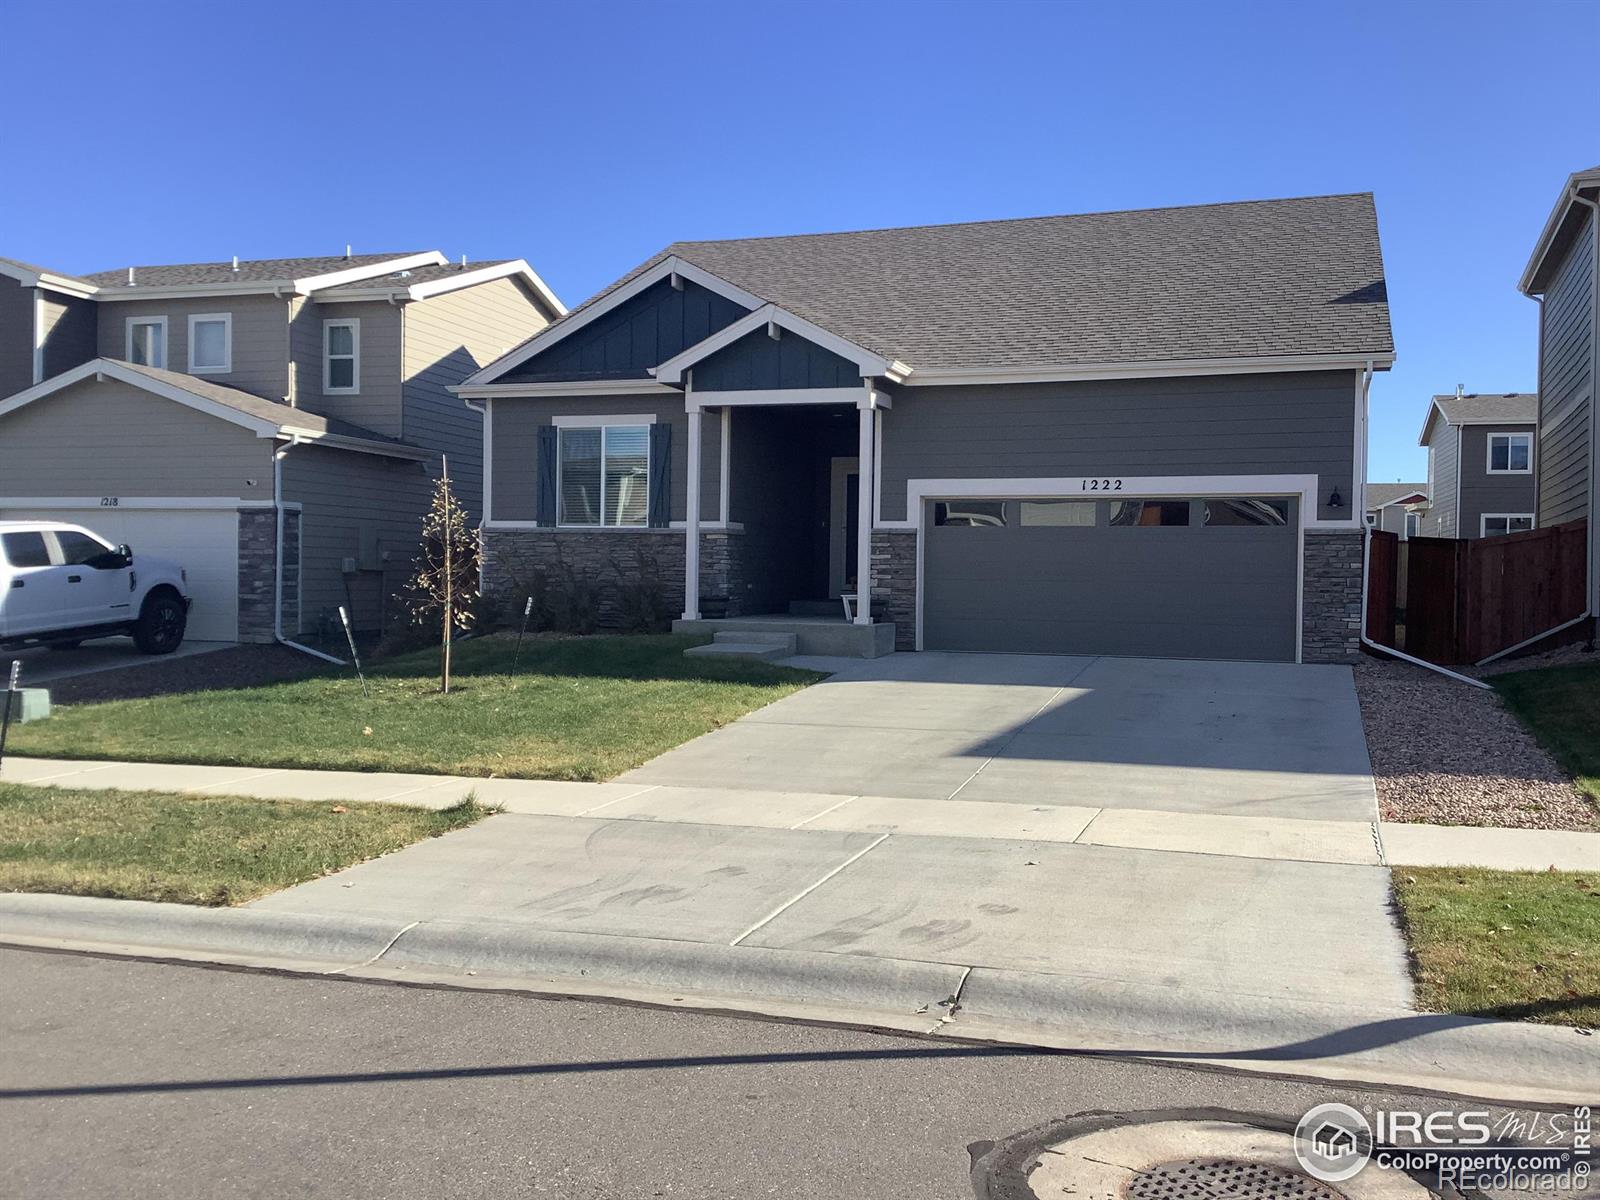 1222  104th Avenue, greeley MLS: 456789999551 Beds: 3 Baths: 2 Price: $465,000